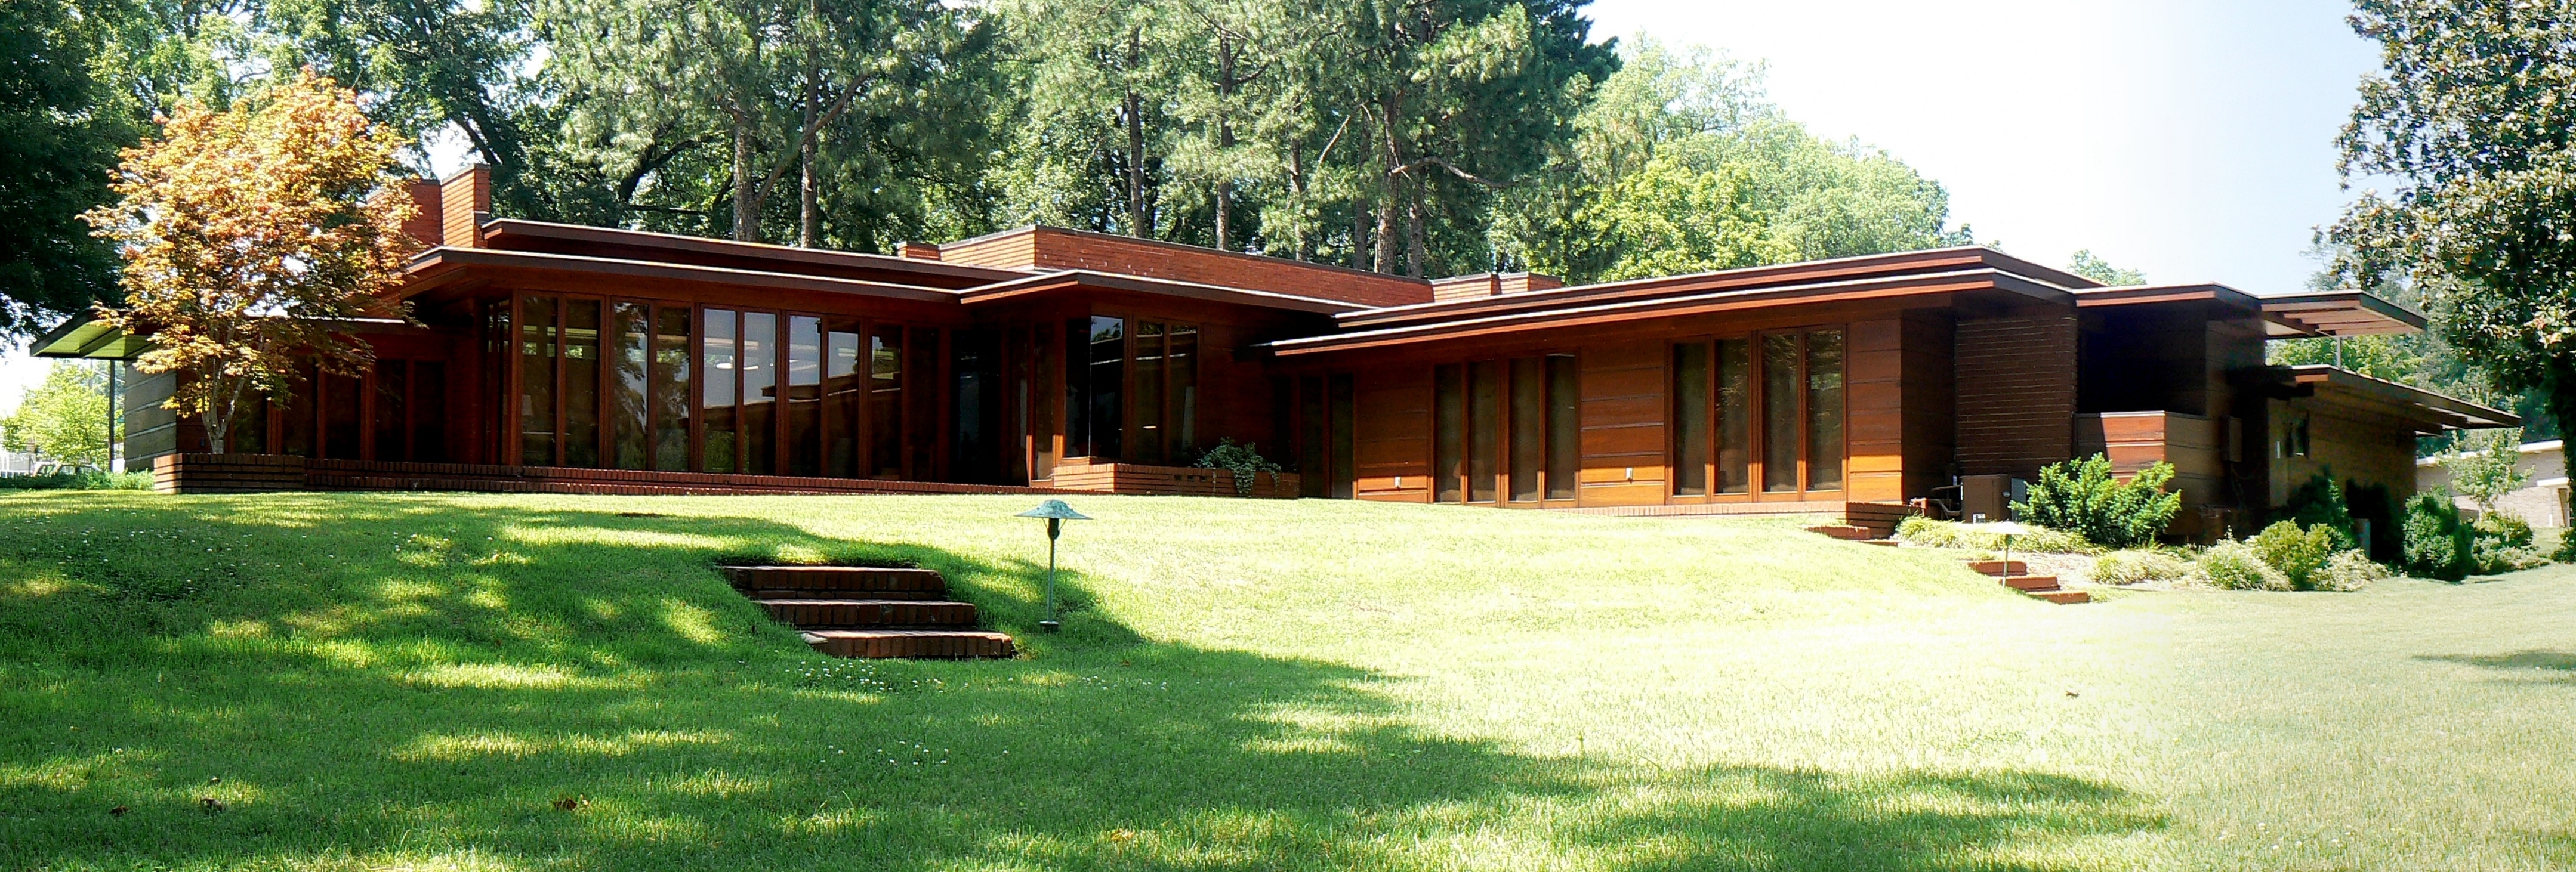 The front exterior of a usonian ranch house with floor to ceiling windows surrounded by trees and grass.